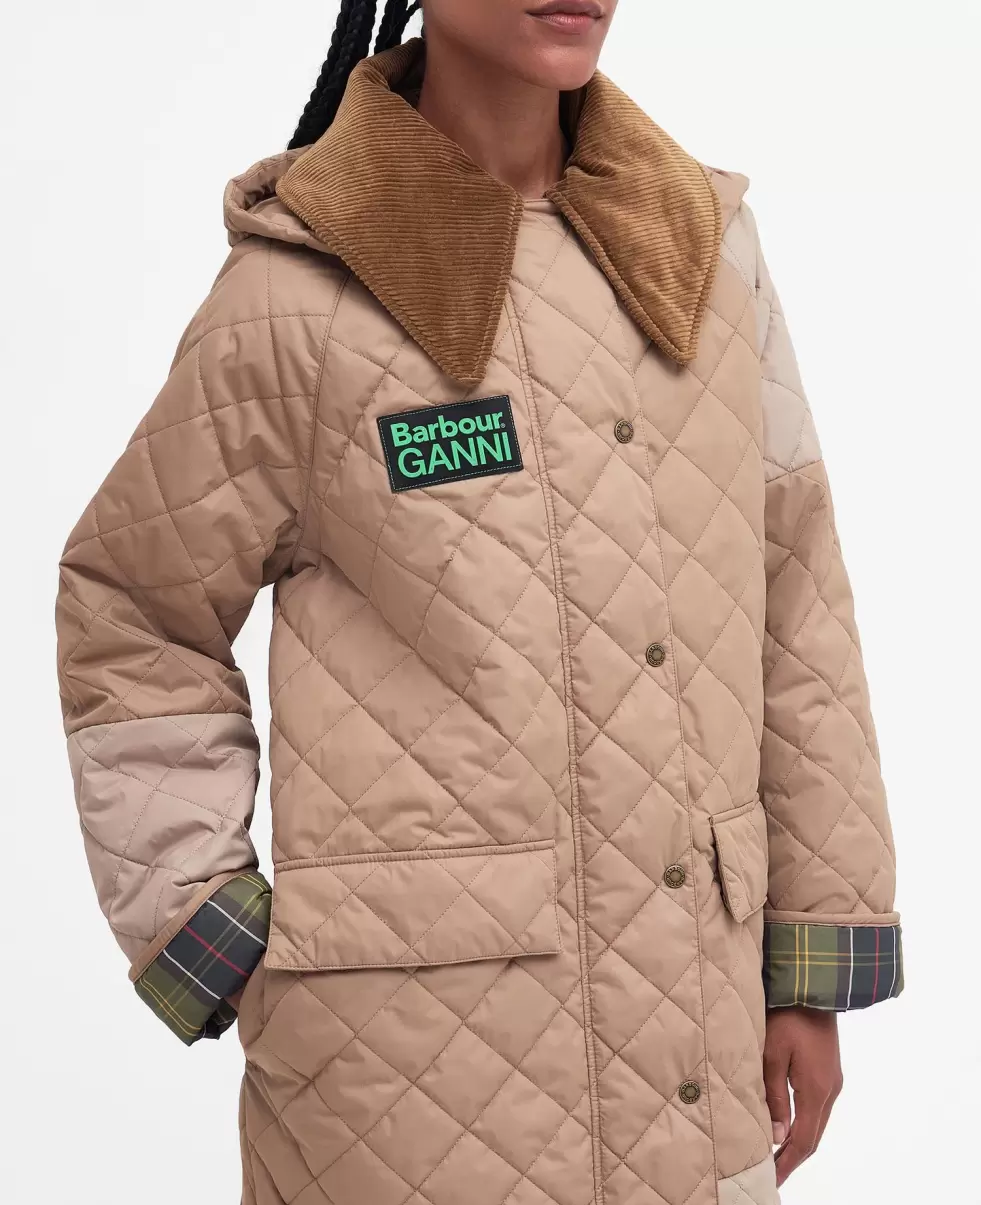 Barbour X Ganni Burghley Quilted Jacket Beige Women Quilted Jackets Rebate - 3